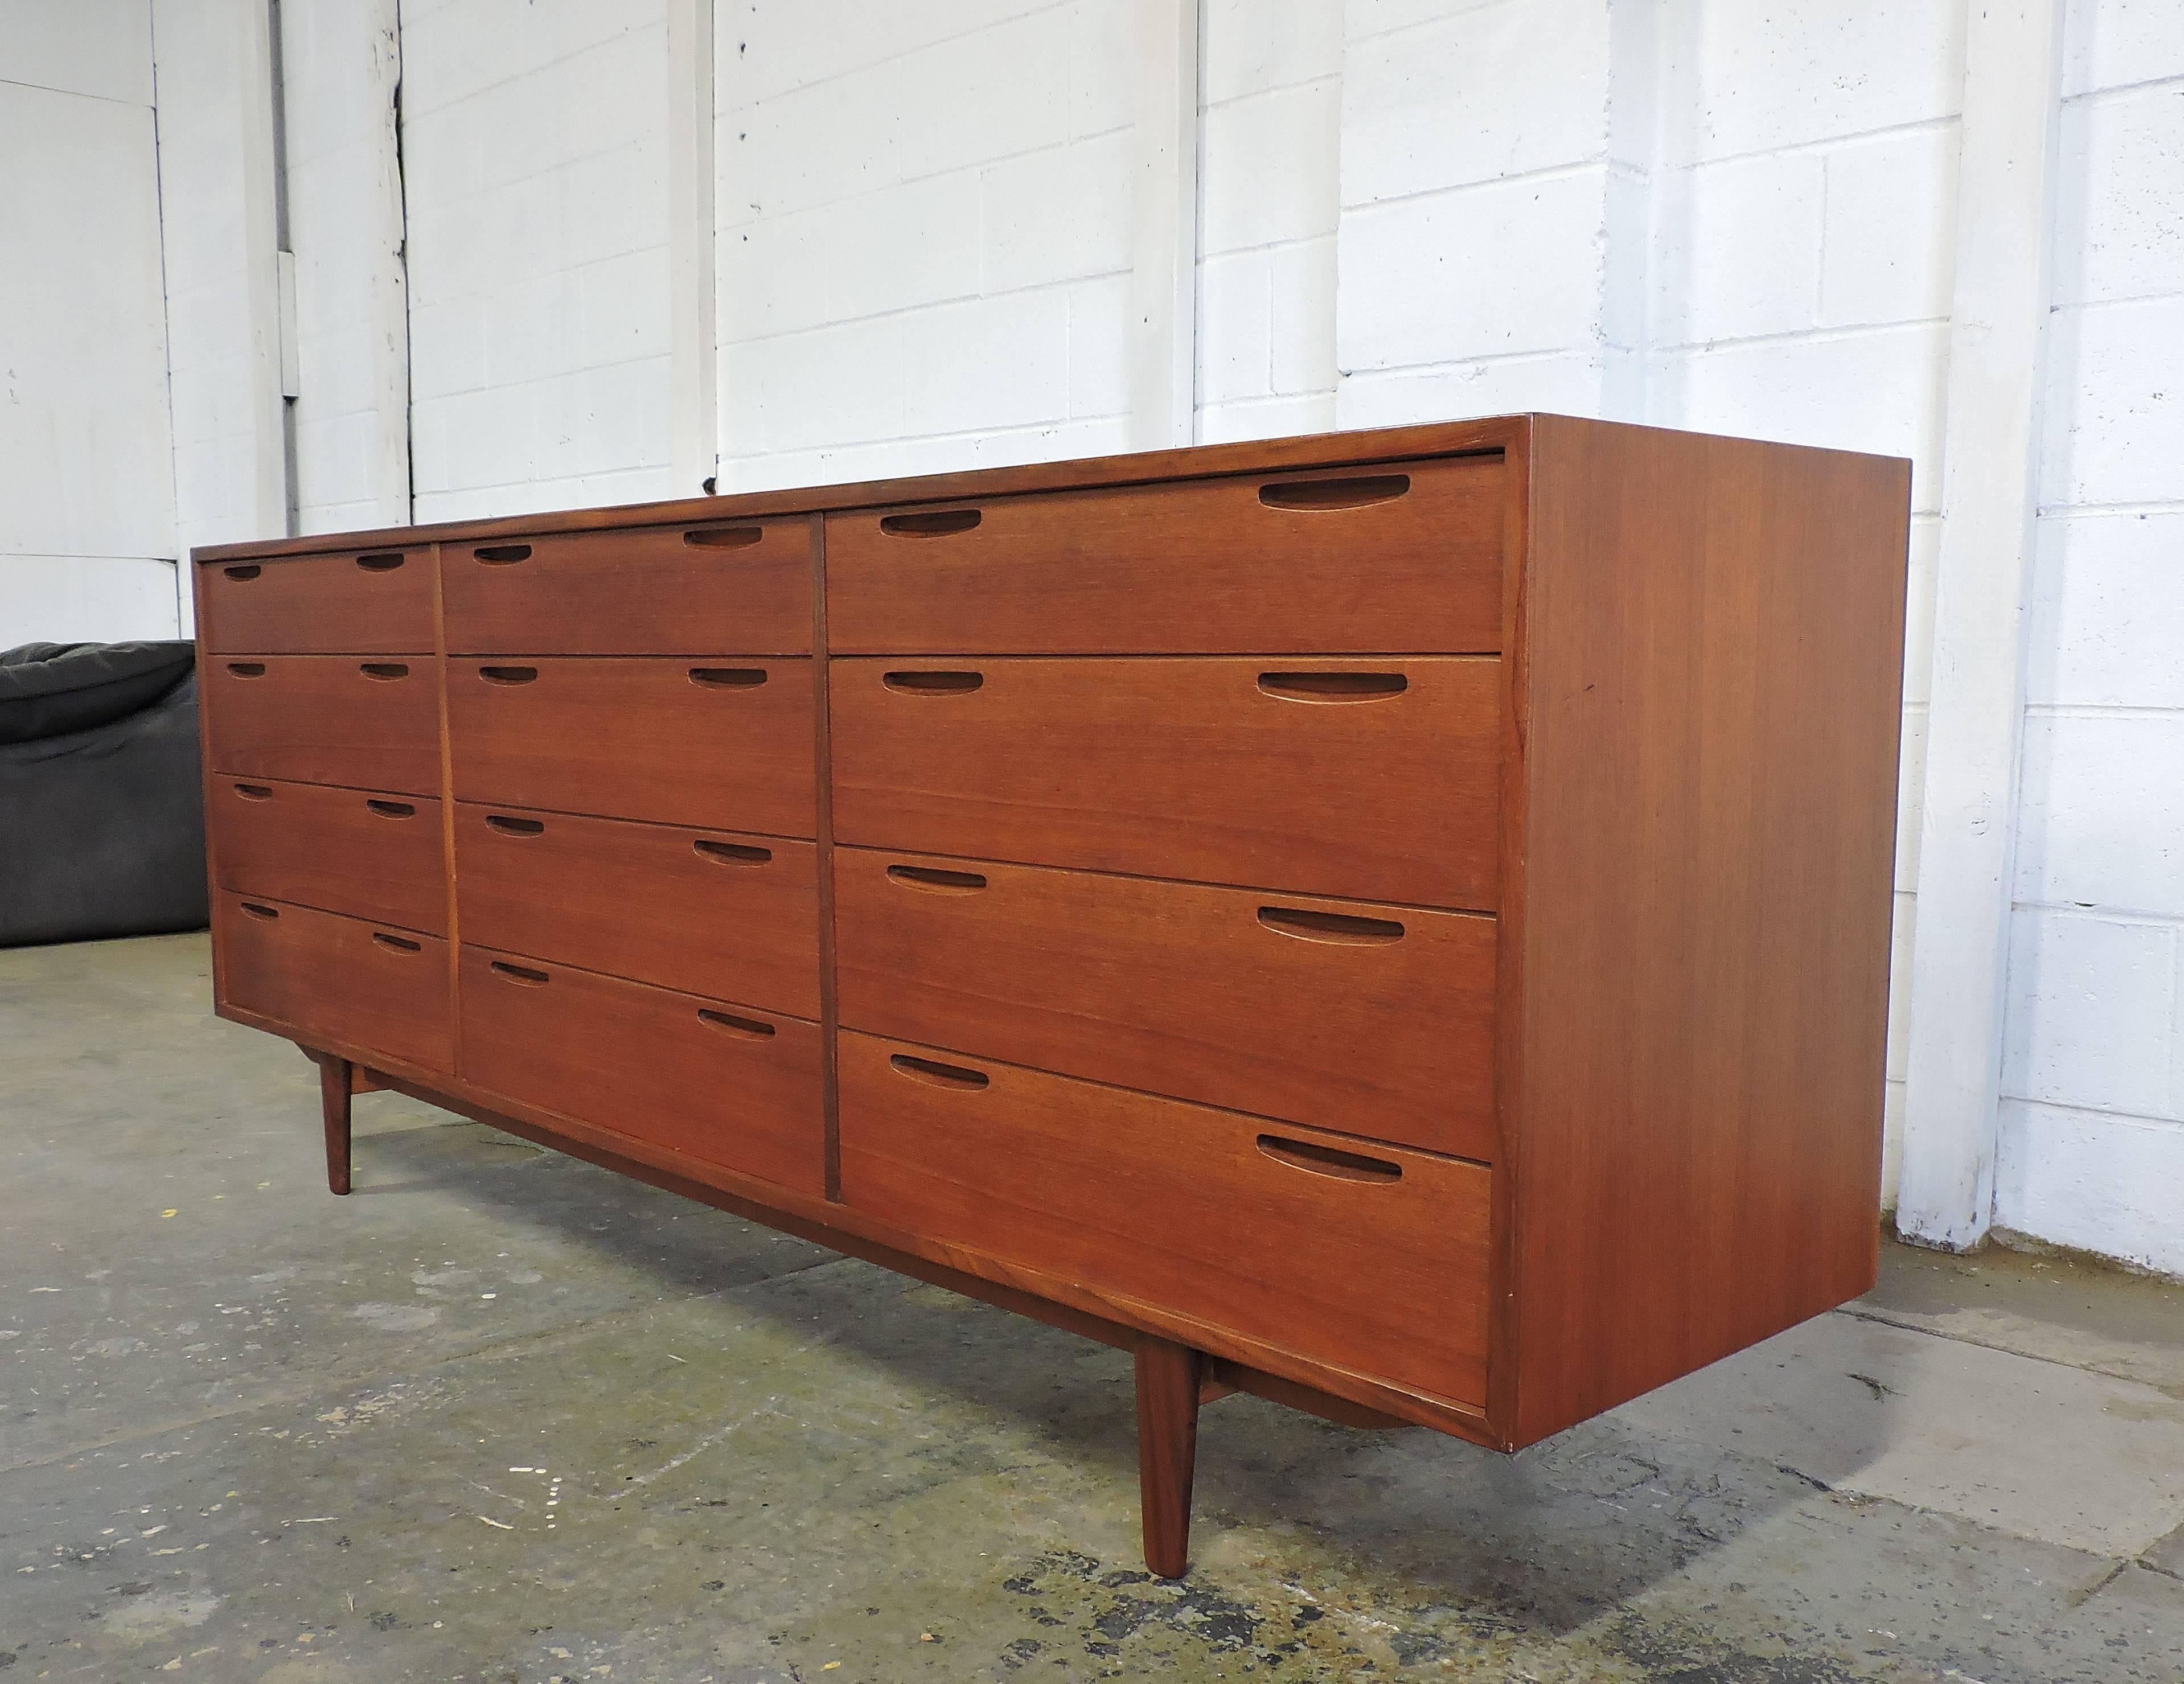 Handsome and hard-to-find triple dresser designed by Ib Kofod Larsen and made in Denmark by Brande Mobelfabrik. This dresser has plenty of storage with twelve dovetailed drawers that have sleek, Minimalist inset pulls. Very well constructed, it also